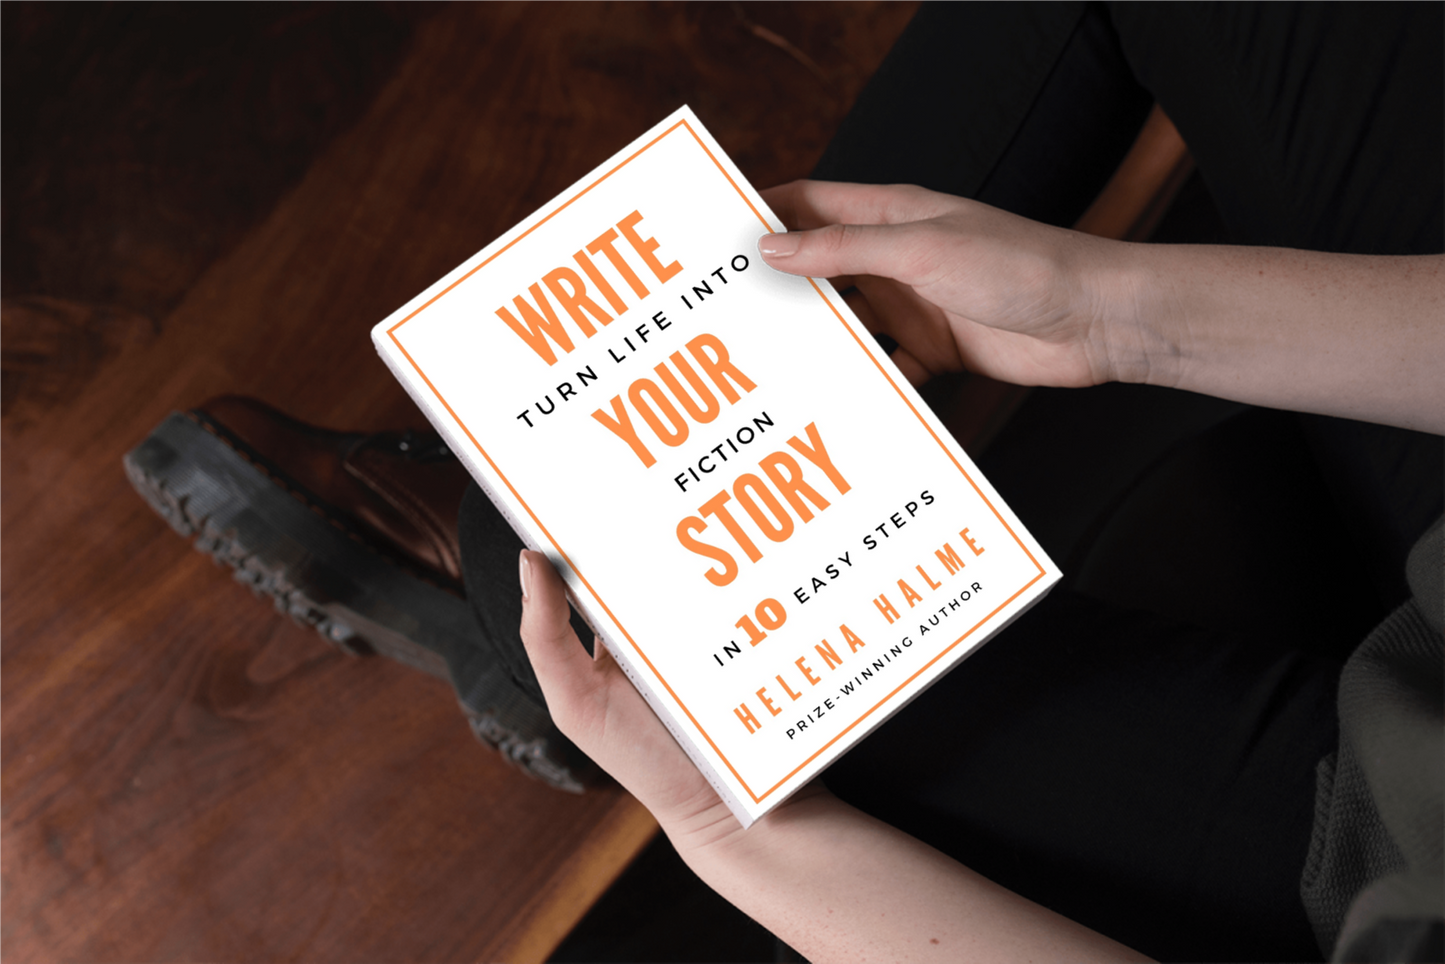 Write Your Story: Turn Your Life into Fiction in 10 Easy Steps